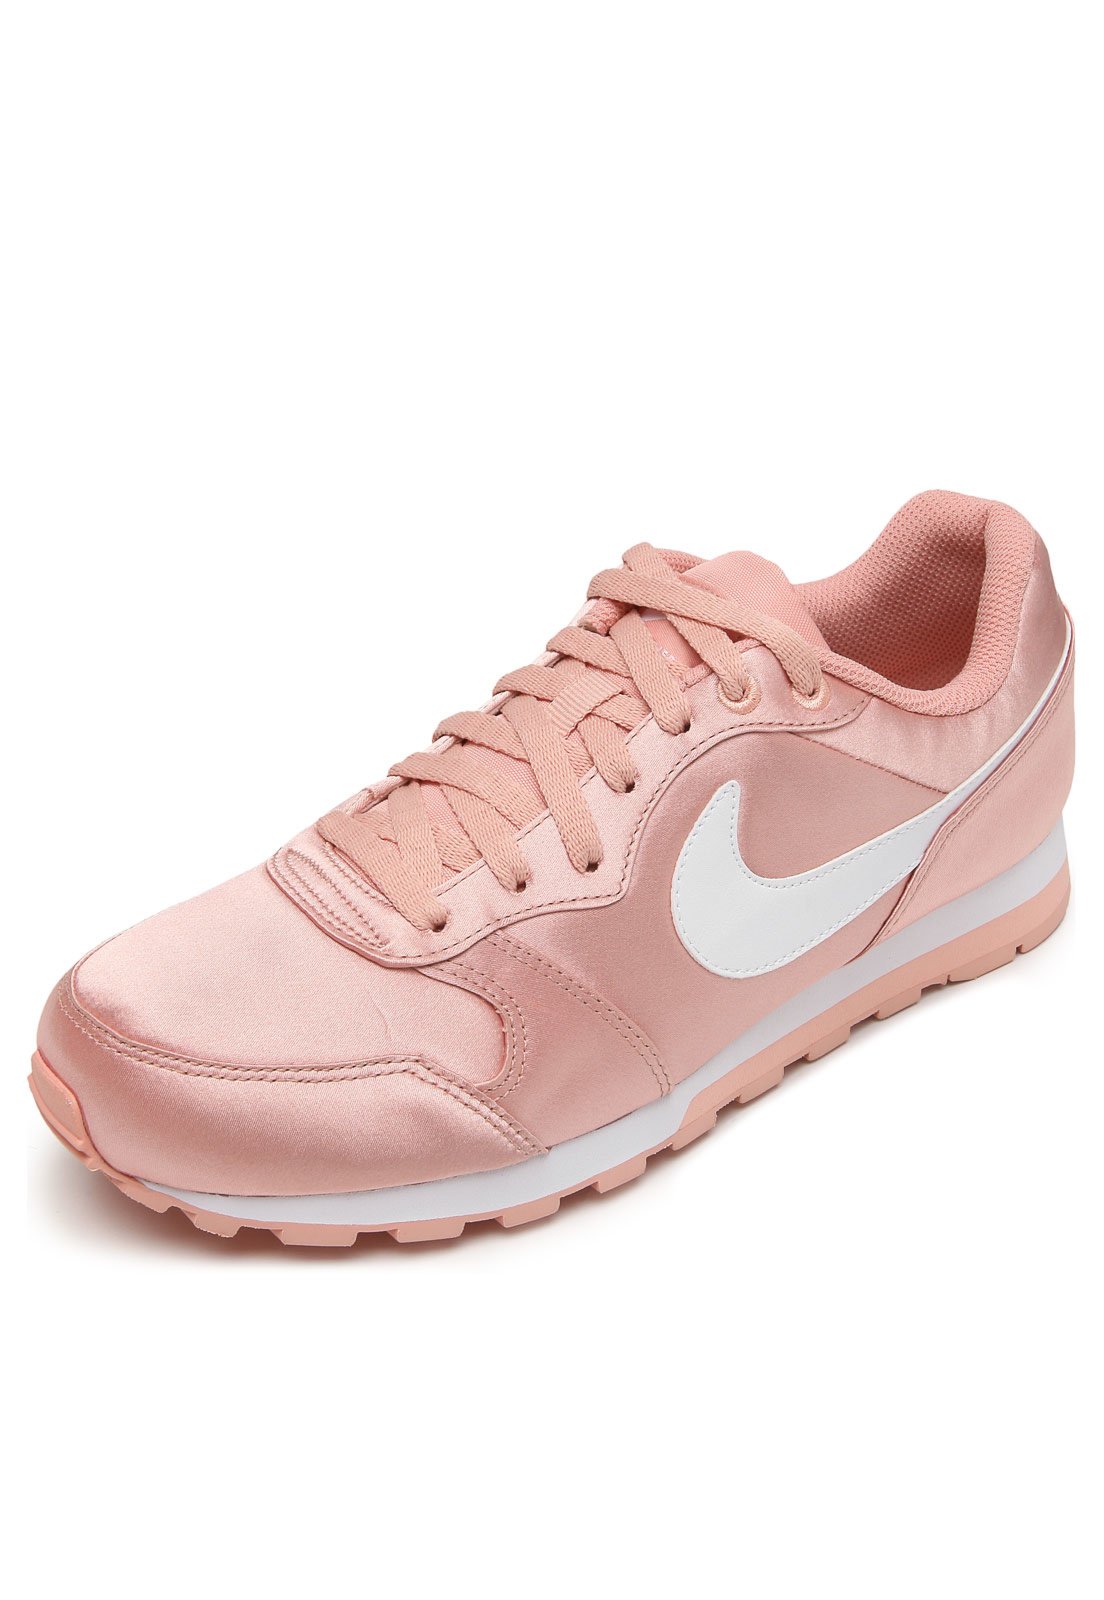 Want to buy \u003e nike md runner rosa, Up 